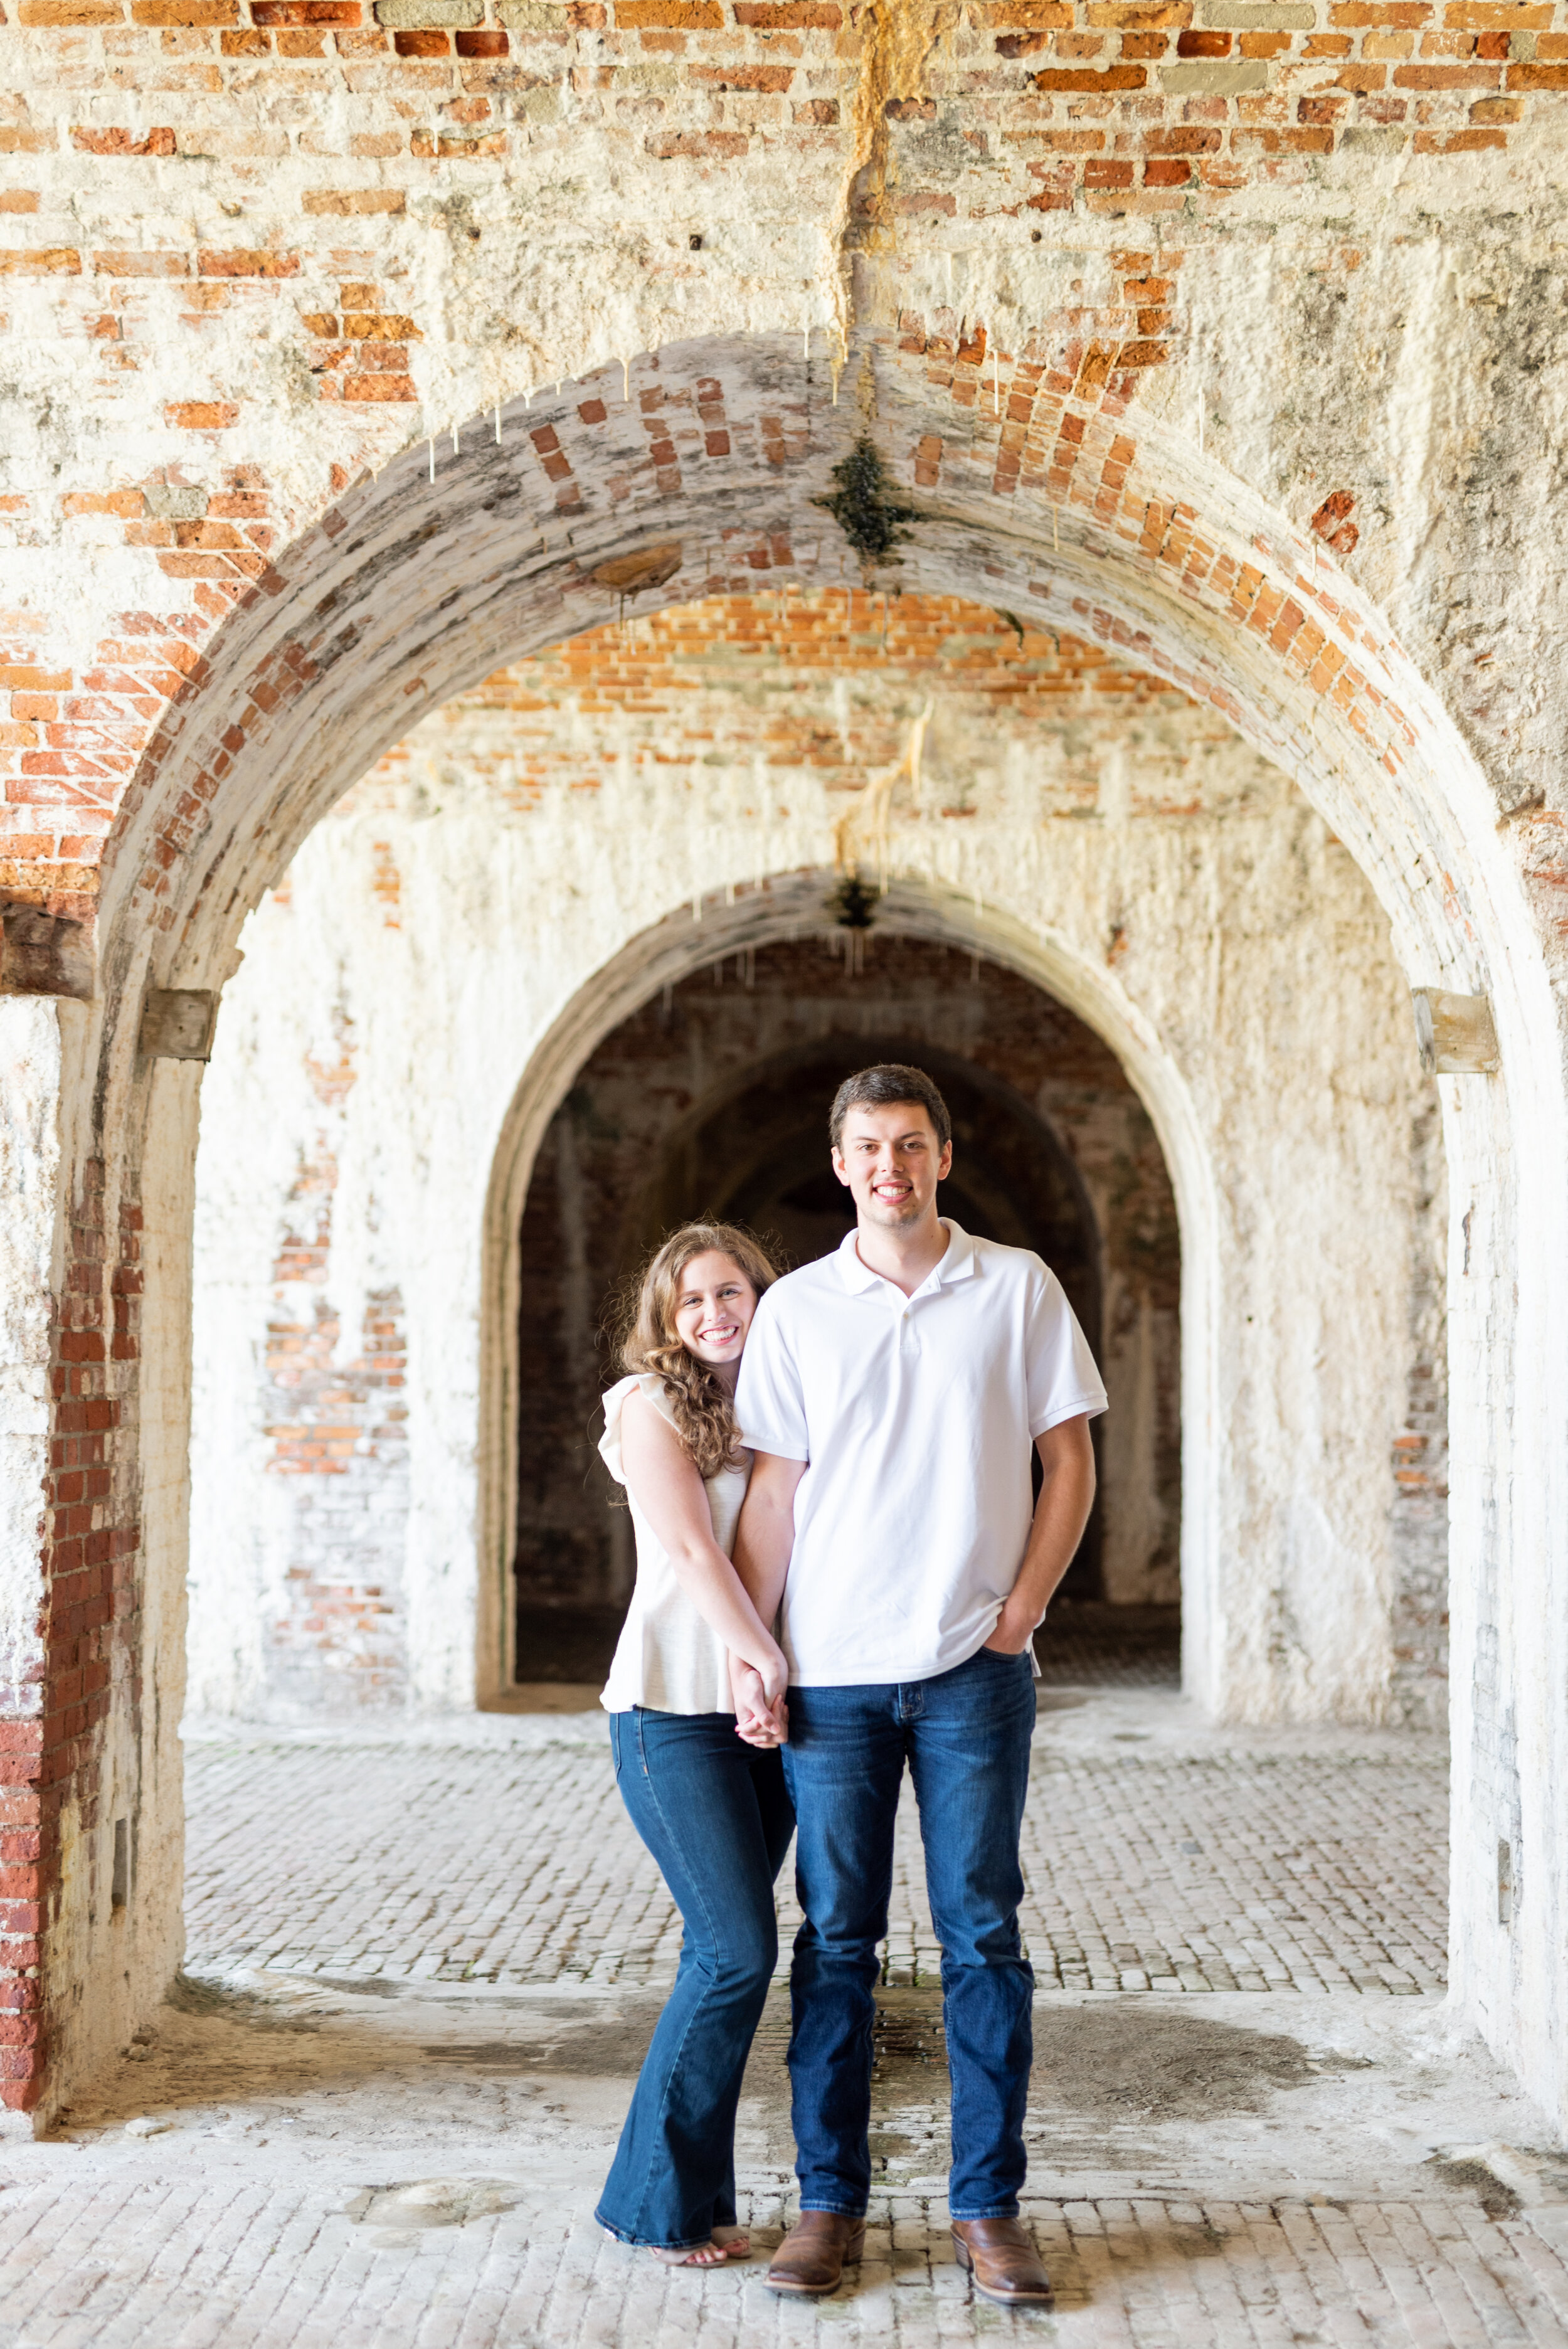 Fort Morgan Historic Site Engagement Photoshoot Photographed by Kristen Marcus Photography